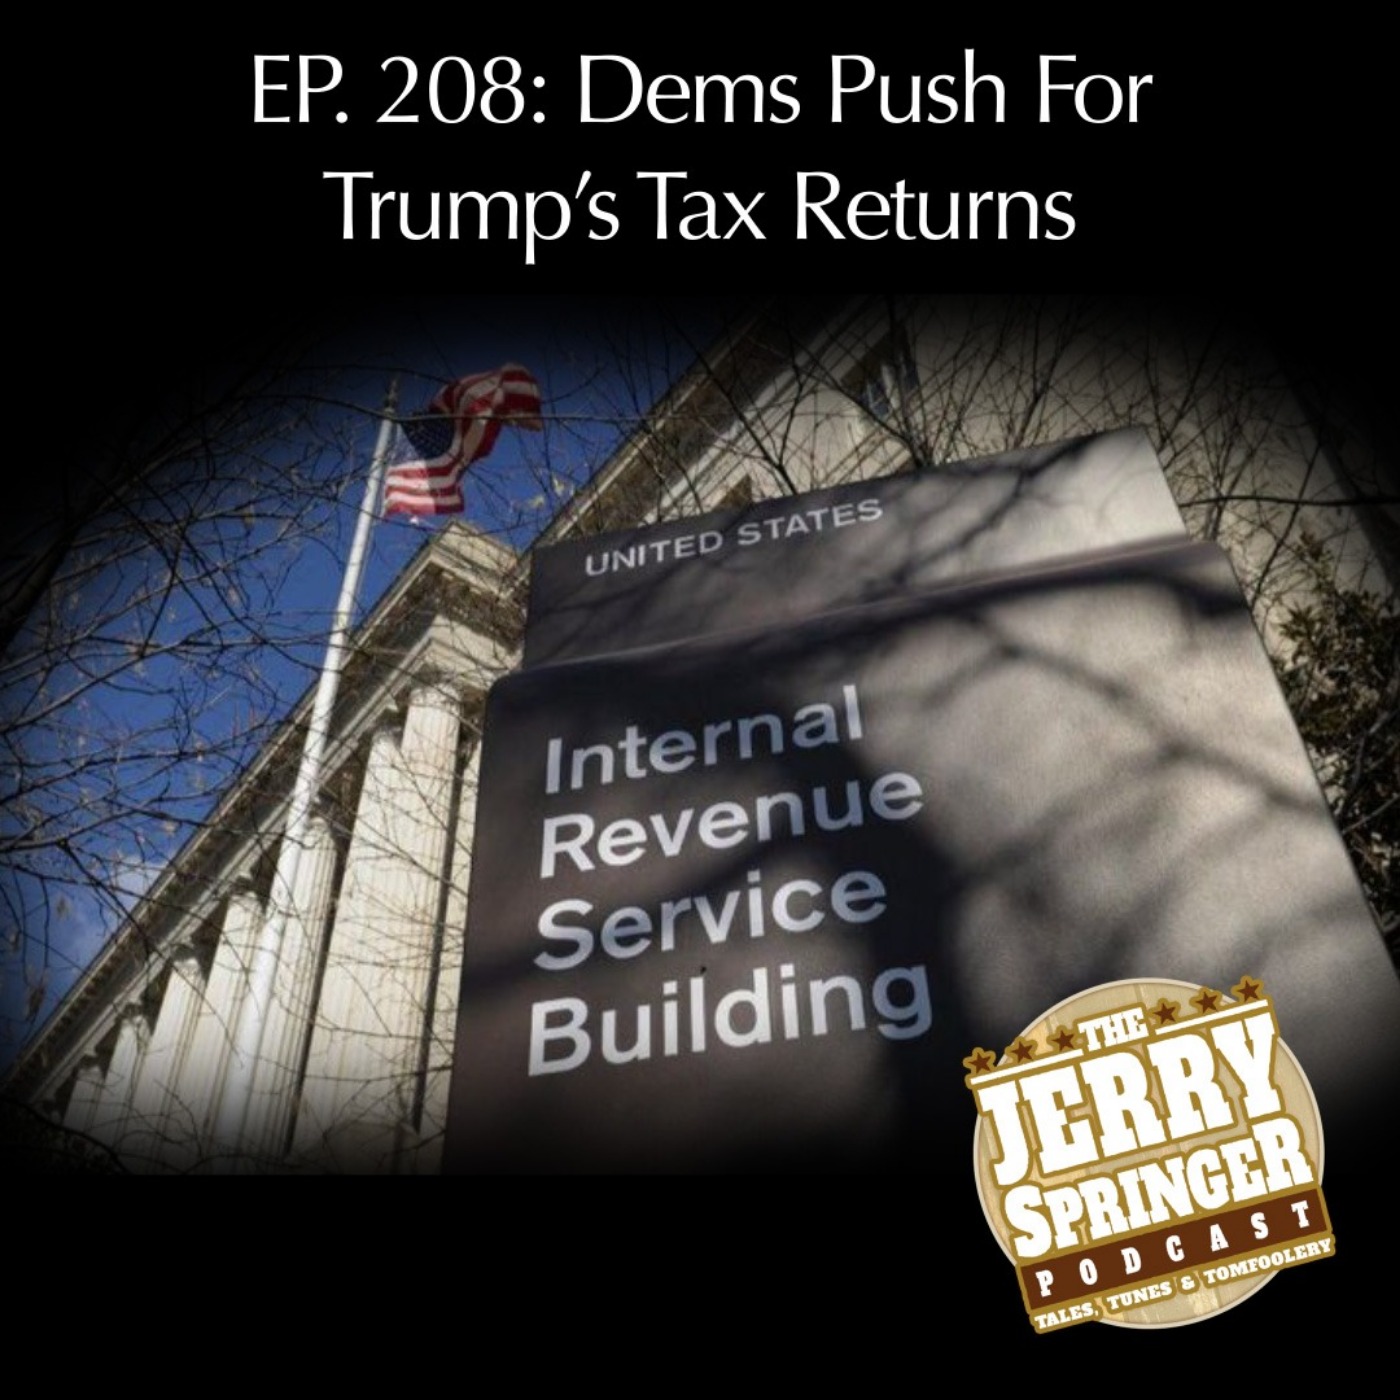 Dems Push For Trump's Tax Returns - EP 208